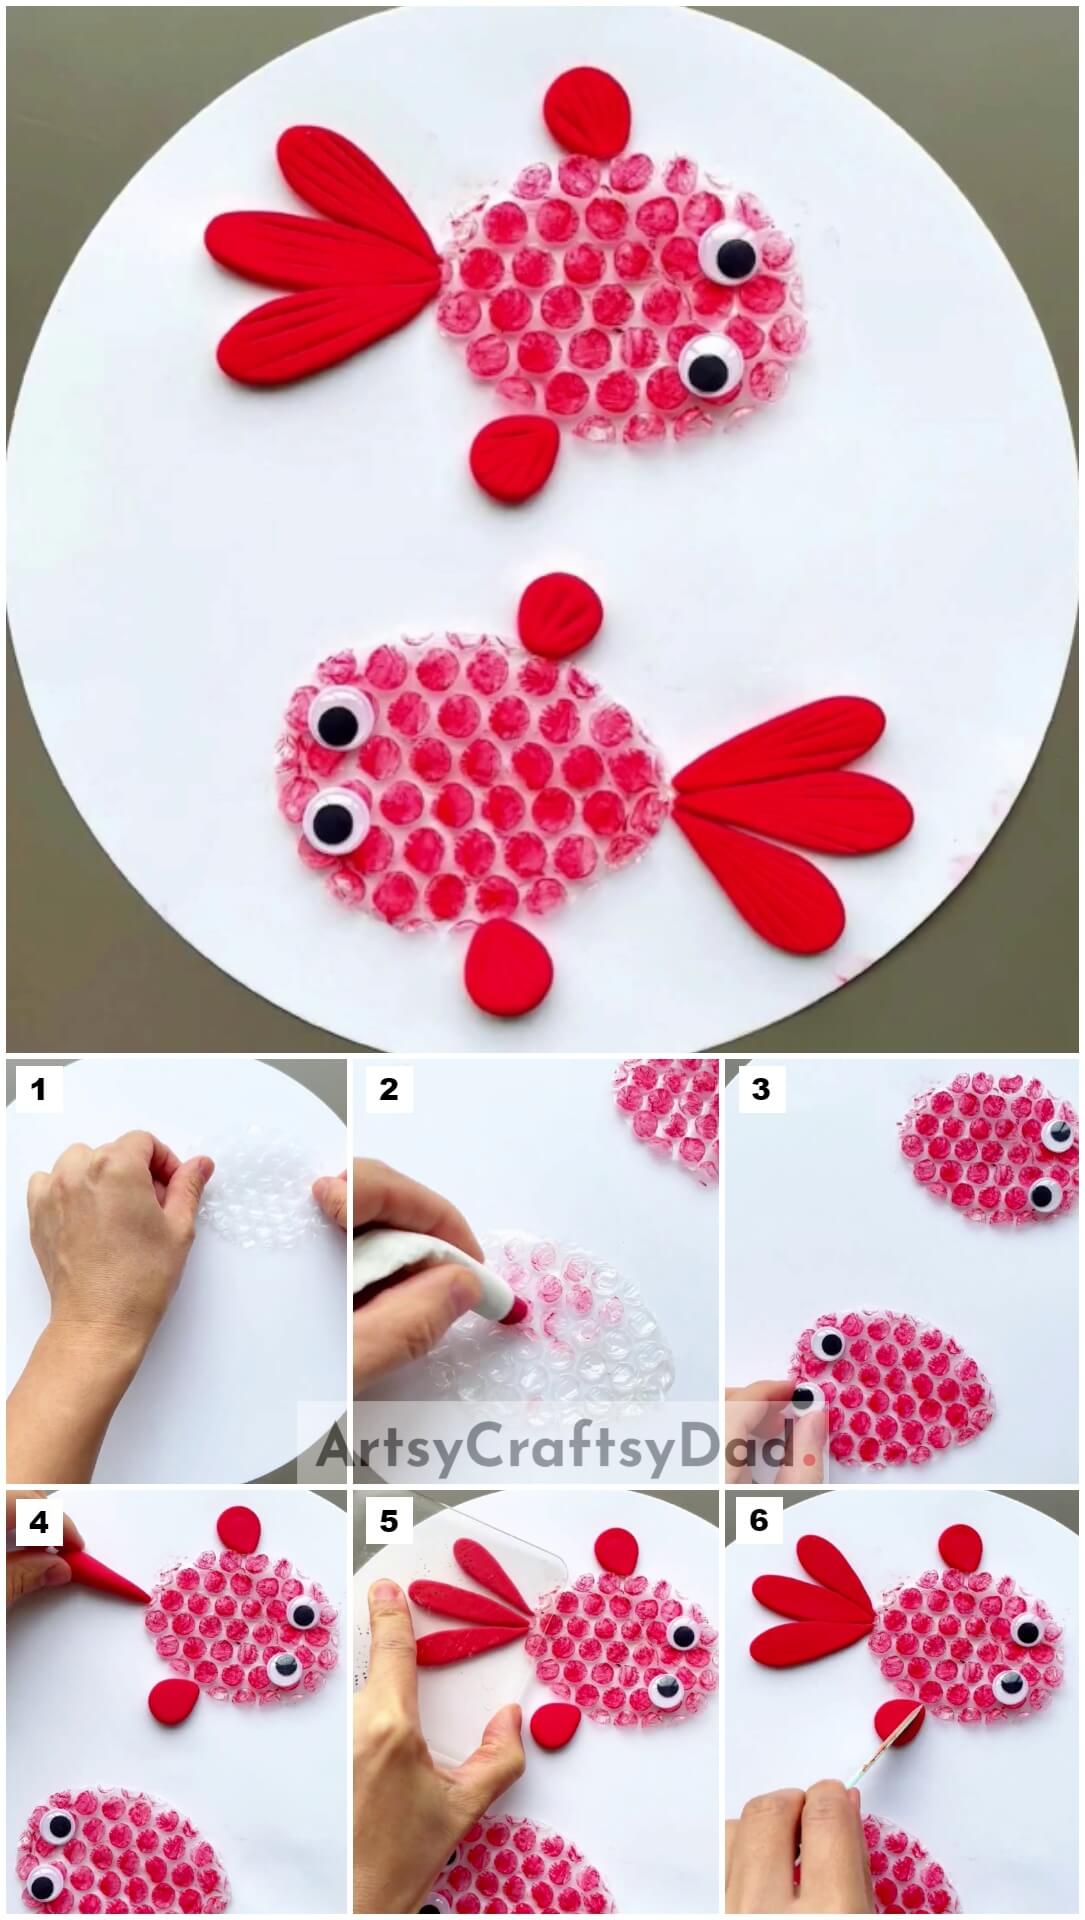 Recycled Bubble Wrap Fish Artwork Tutorial for Children